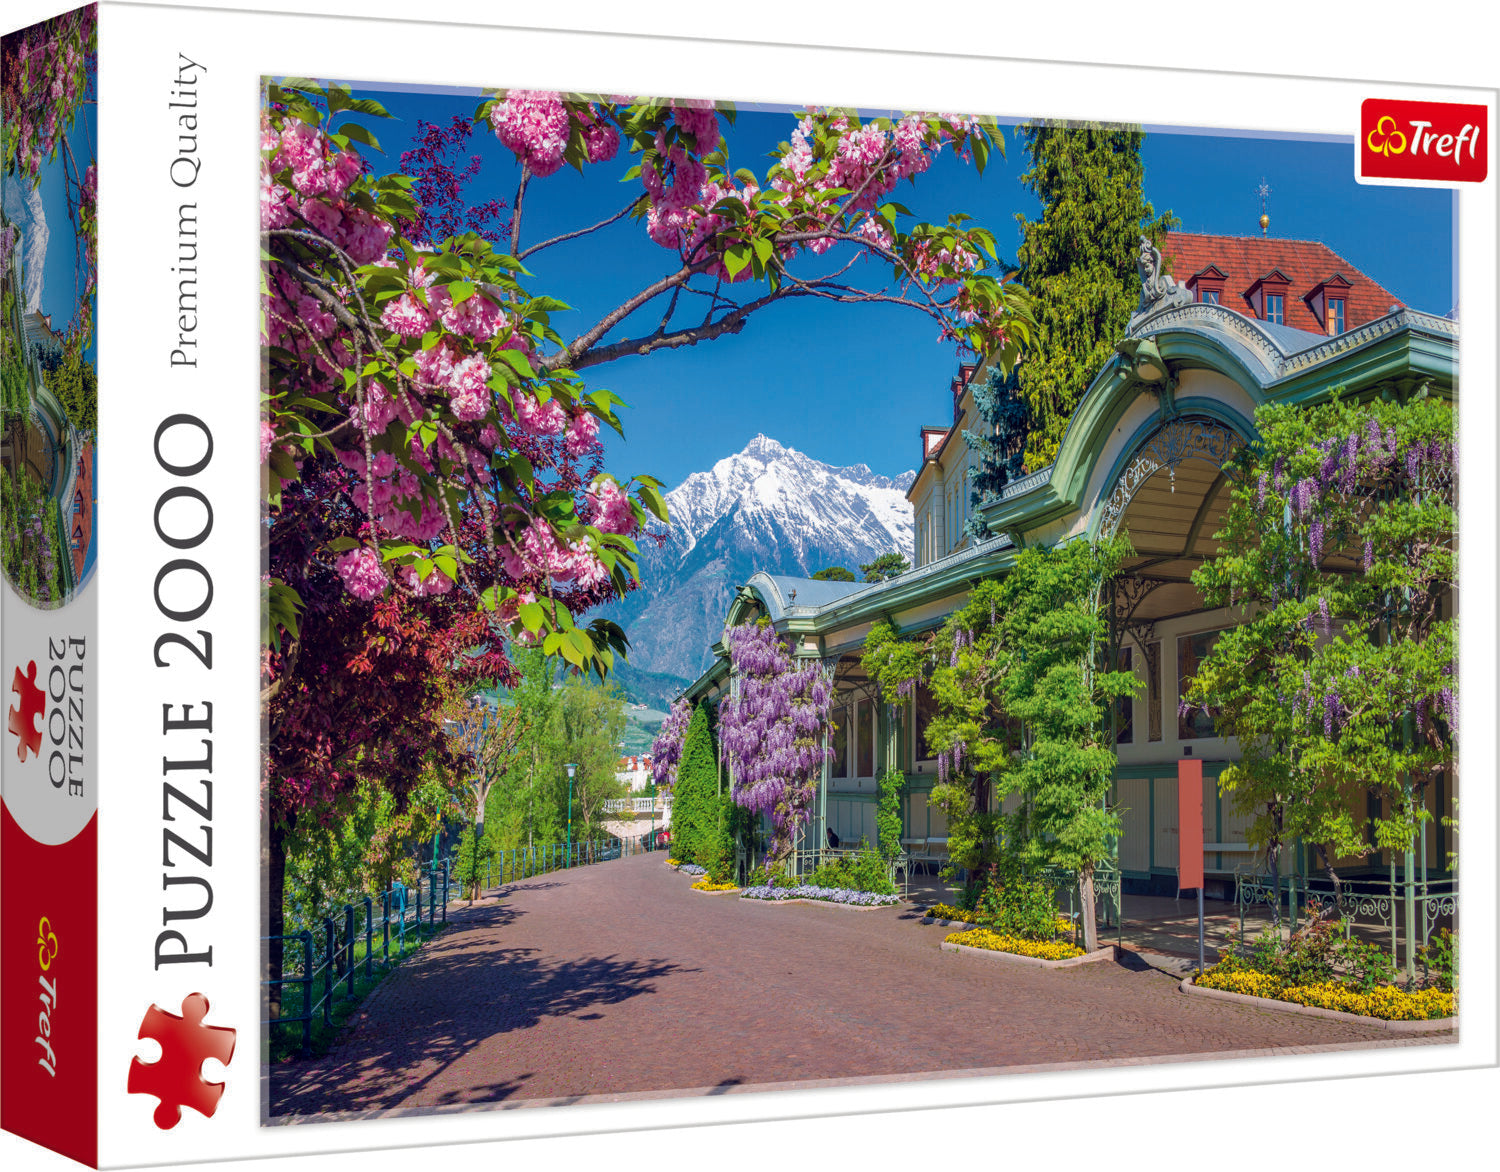 2000-Piece Jigsaw Puzzles for Adults